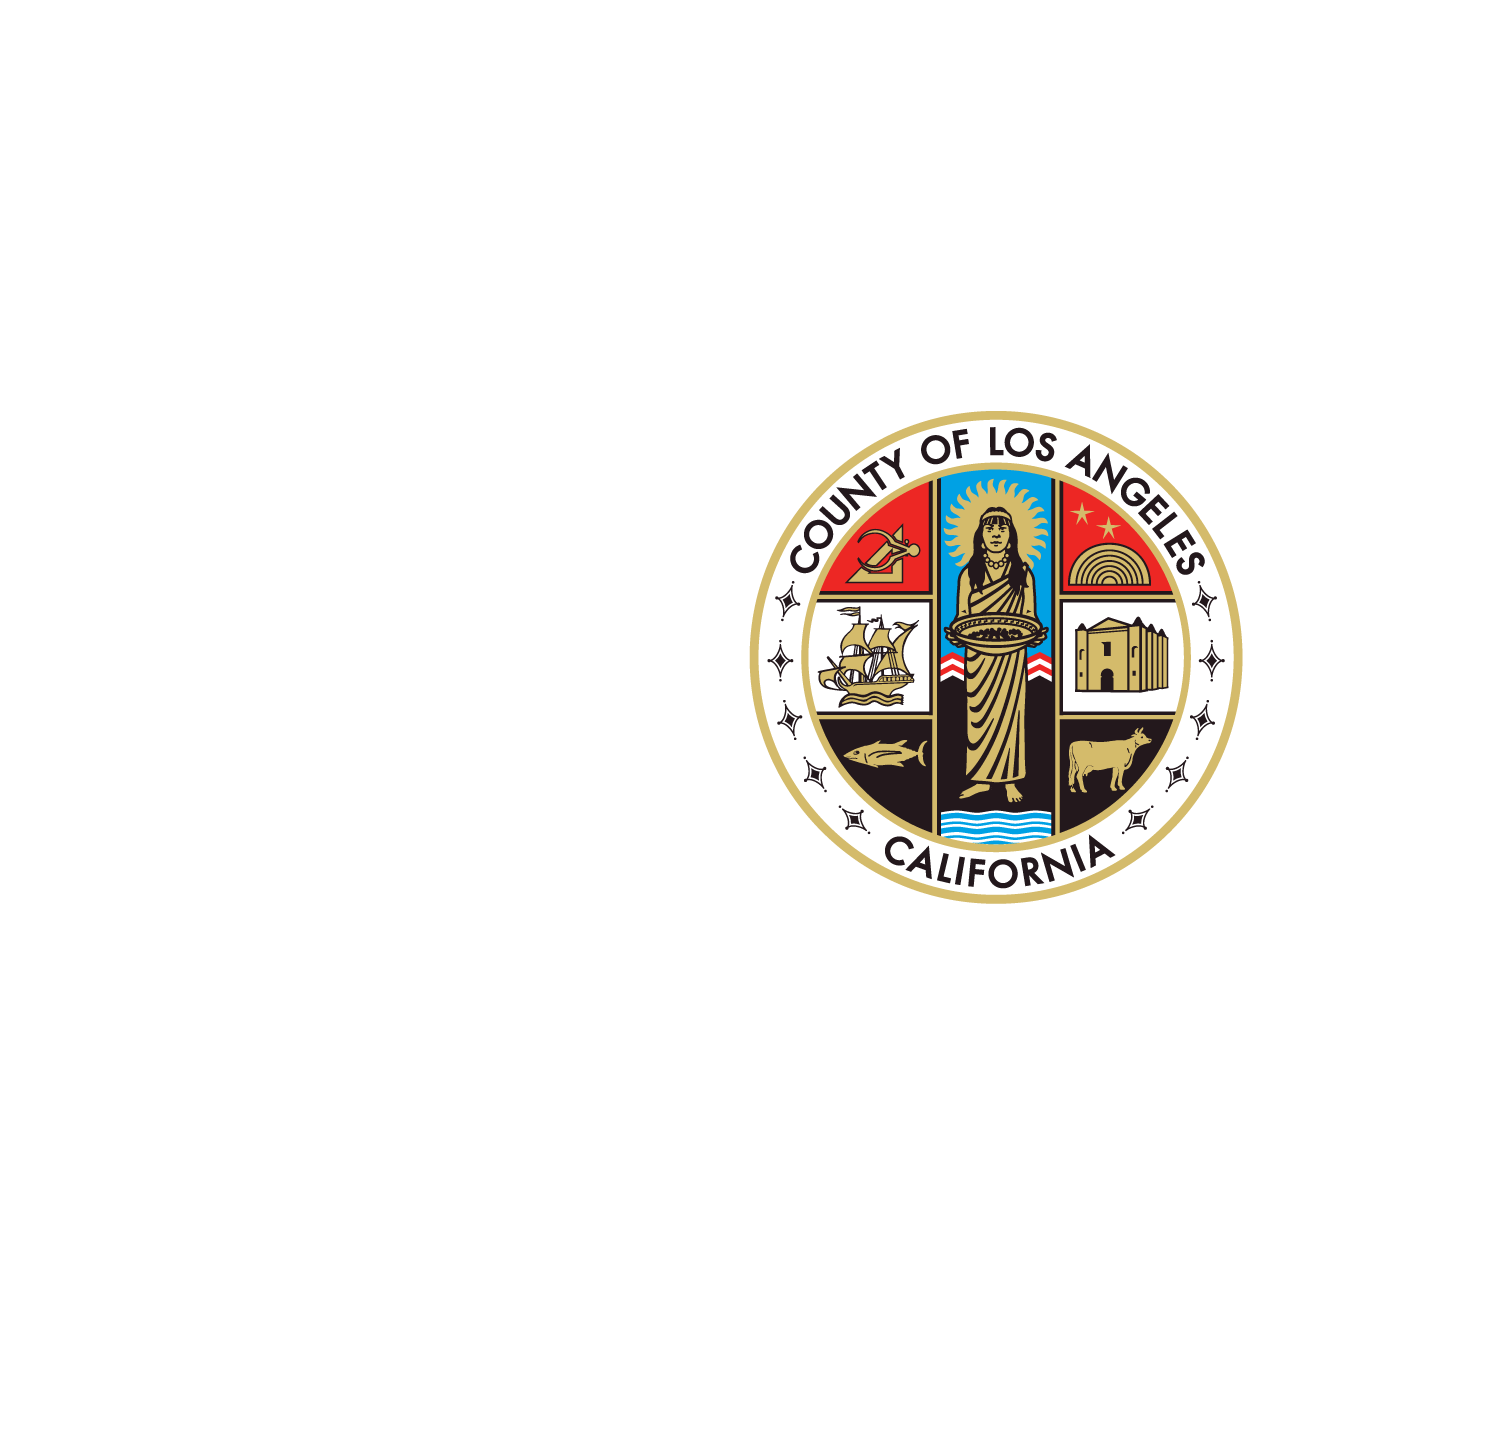 Committee Book - Los Angeles County Board of Supervisors